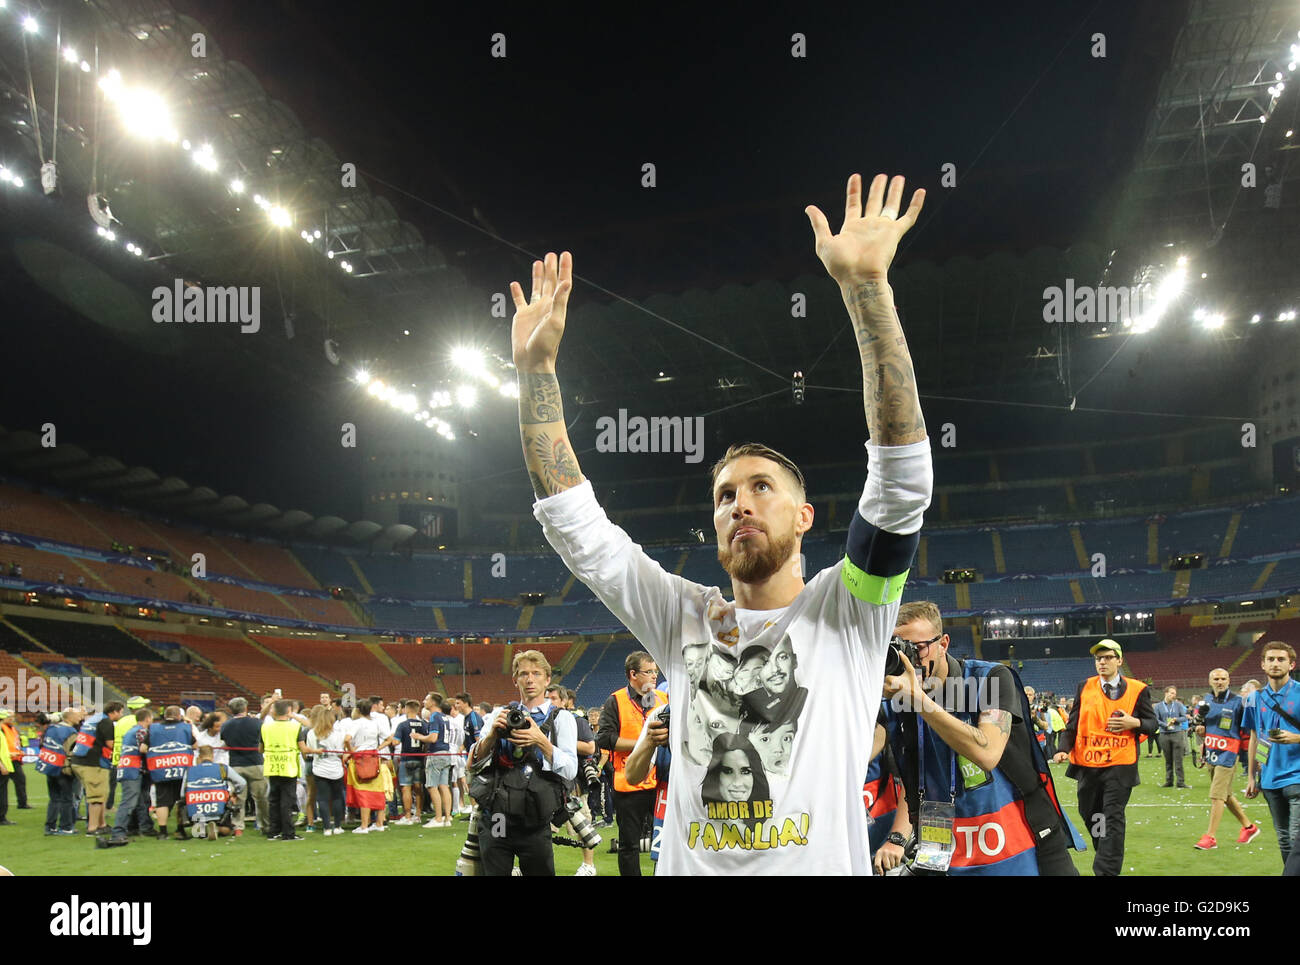 Milan, Italy. 28th May, 2016. Real's captain Sergio Ramos celebrates after winning the UEFA Champions League Final between Real Madrid and Atletico Madrid at the Stadio Giuseppe Meazza in Milan, Italy, 28 May 2016. Photo: Christian Charisius/dpa/Alamy Live News Stock Photo